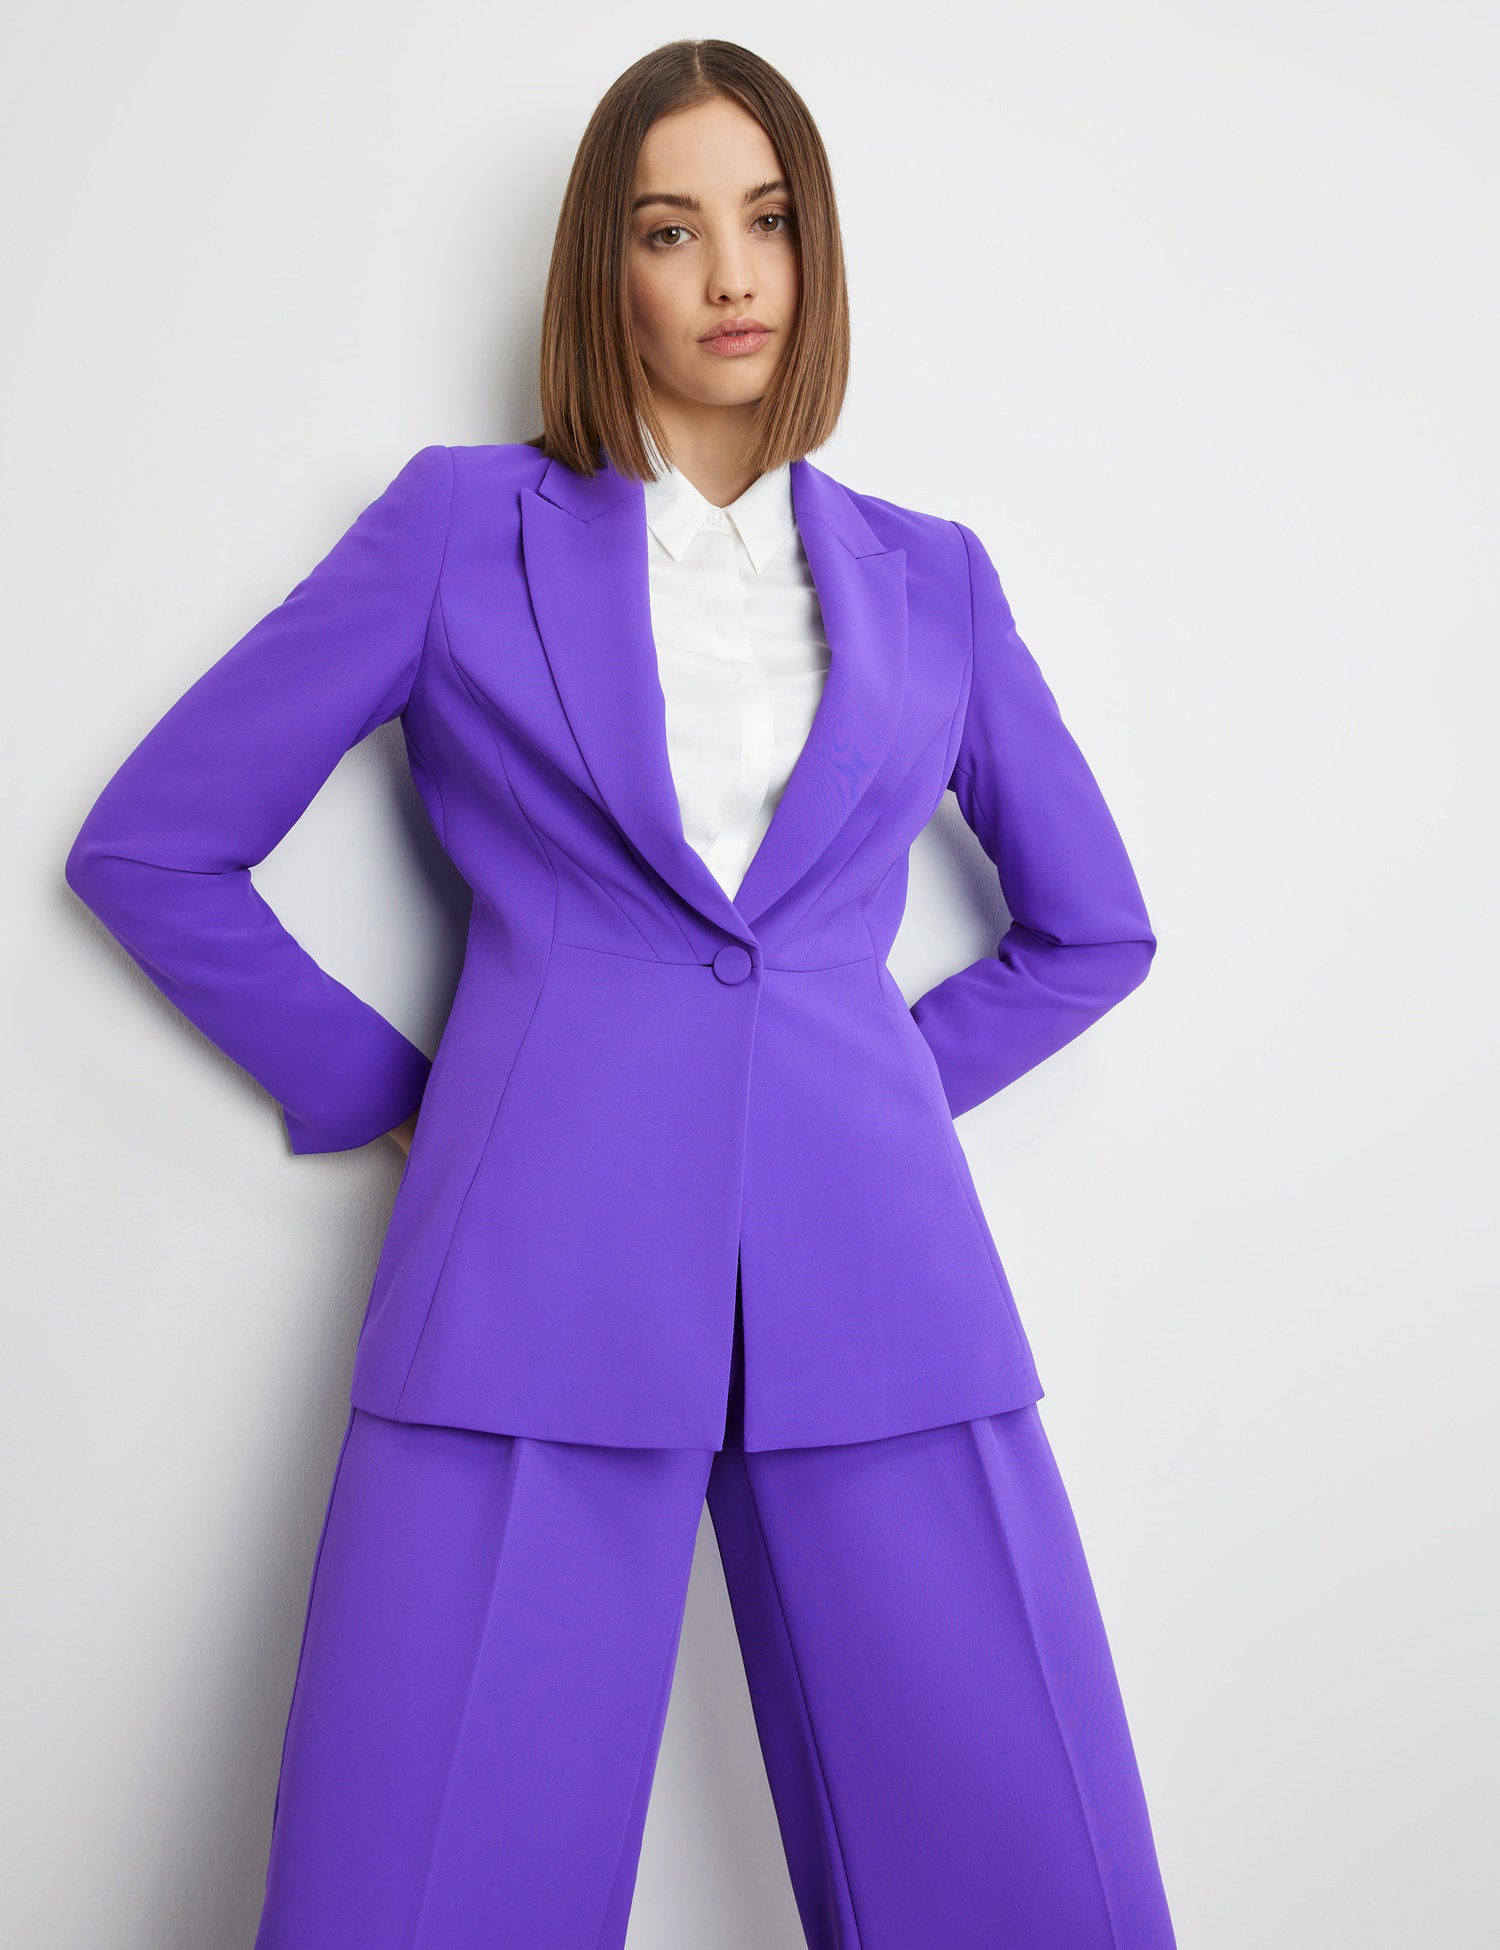 Fitted Blazer Made Of Fine Fabric_530302-11054_8810_05